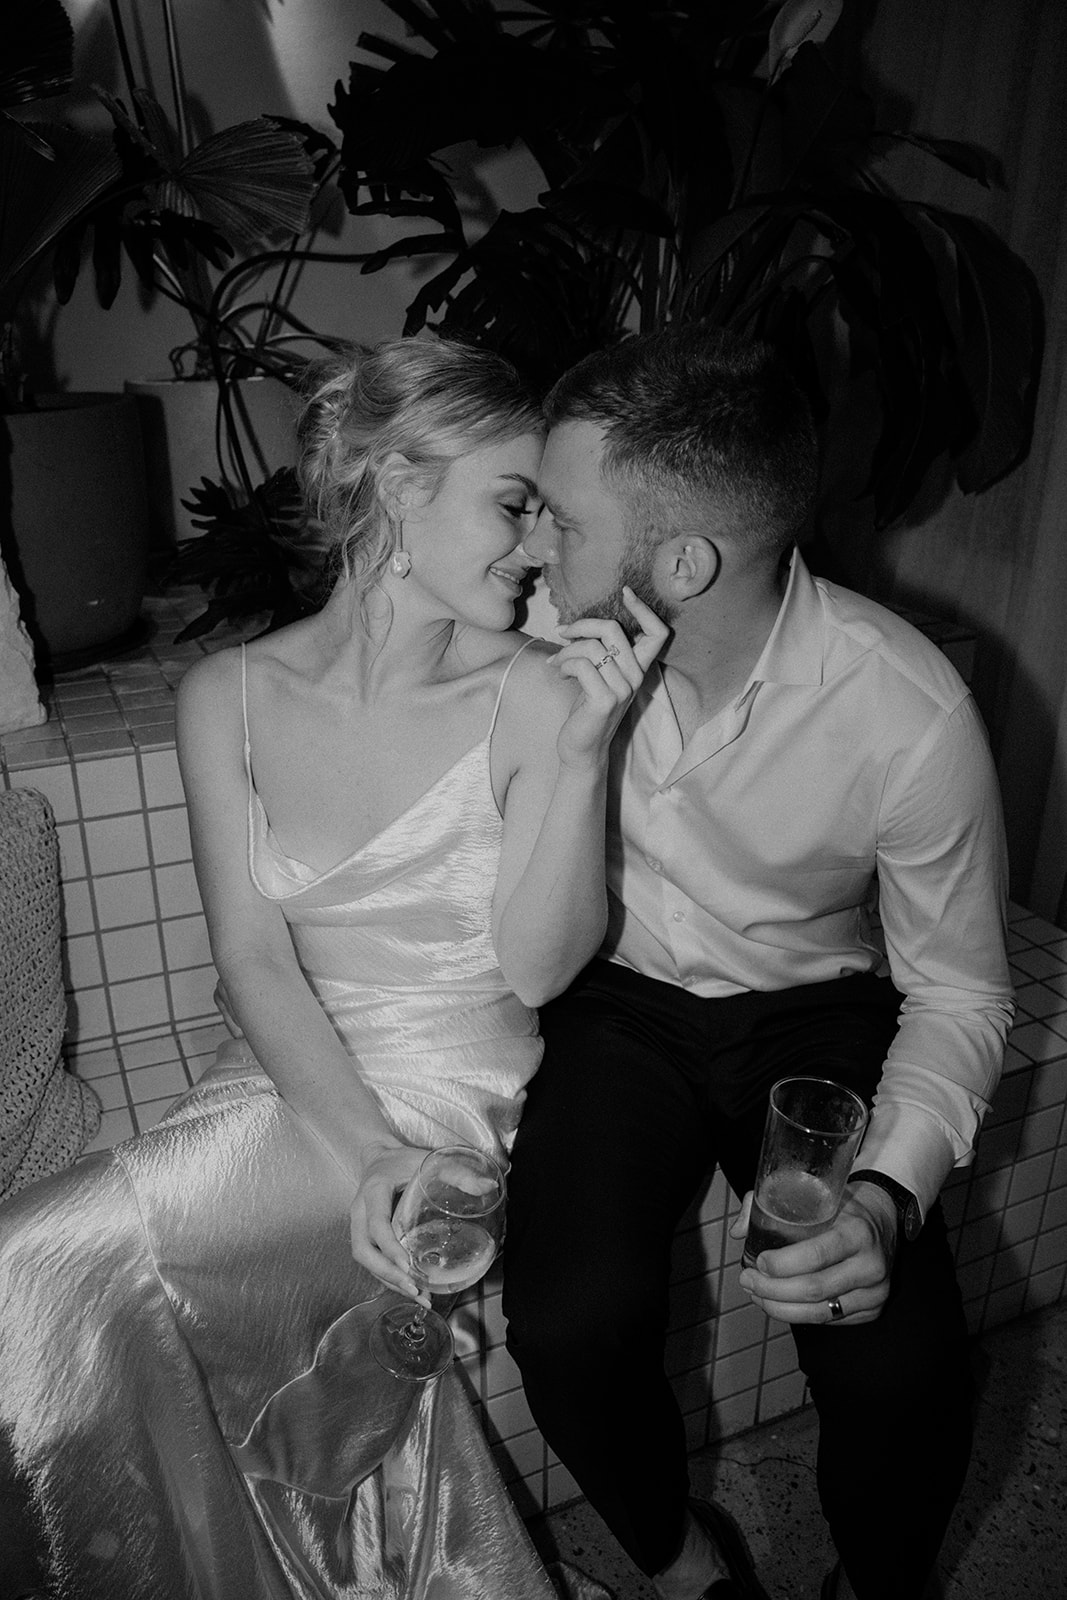 Couple after party shots at the wedding reception in The Fernery Mosman